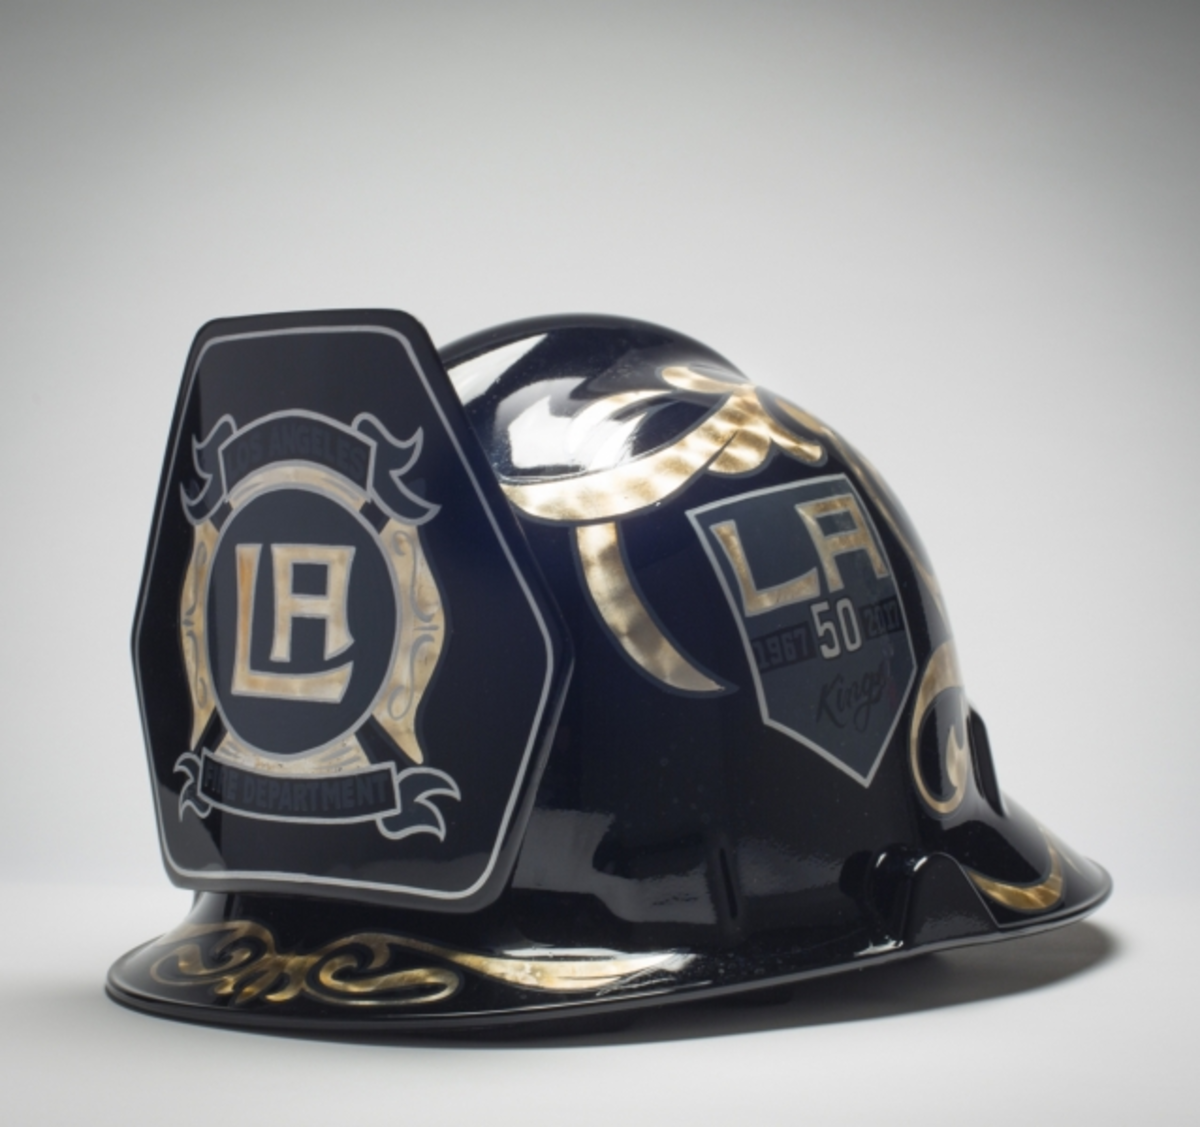 The Kings Care Foundation will auction off the signed LA Kings fire helmet as part of LA Kings Firefighter Appreciation Night at STAPLES Center on January 6, 2018. Proceeds to benefit the Los Angeles Fire Department Foundation.